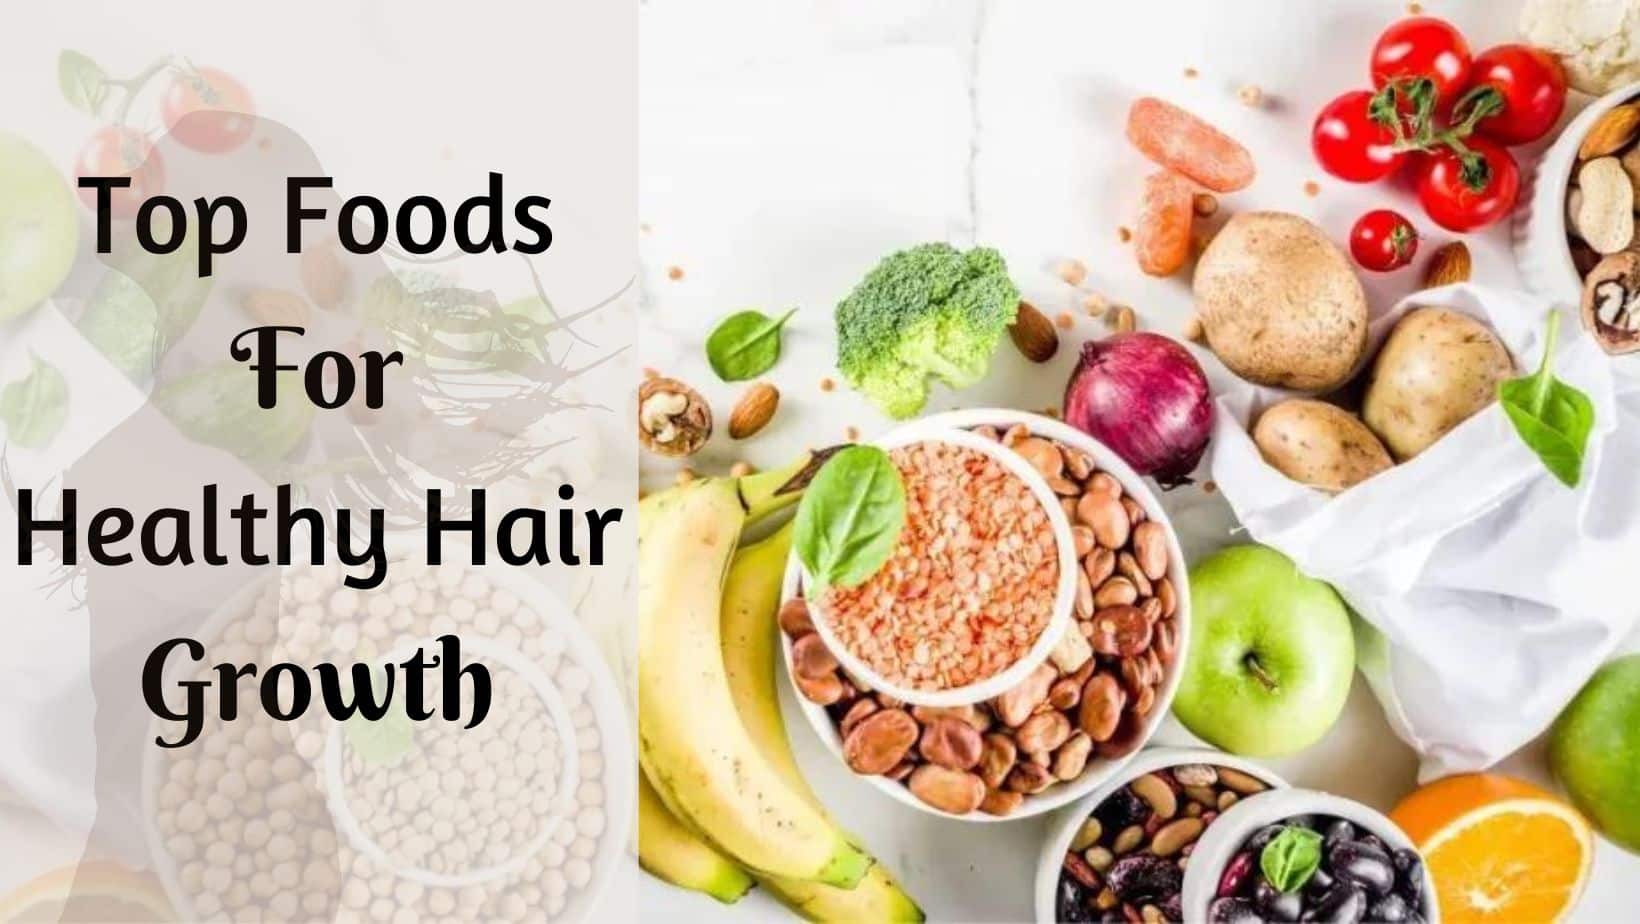 6 Ways to Make Your Hair Grow Faster and Stronger